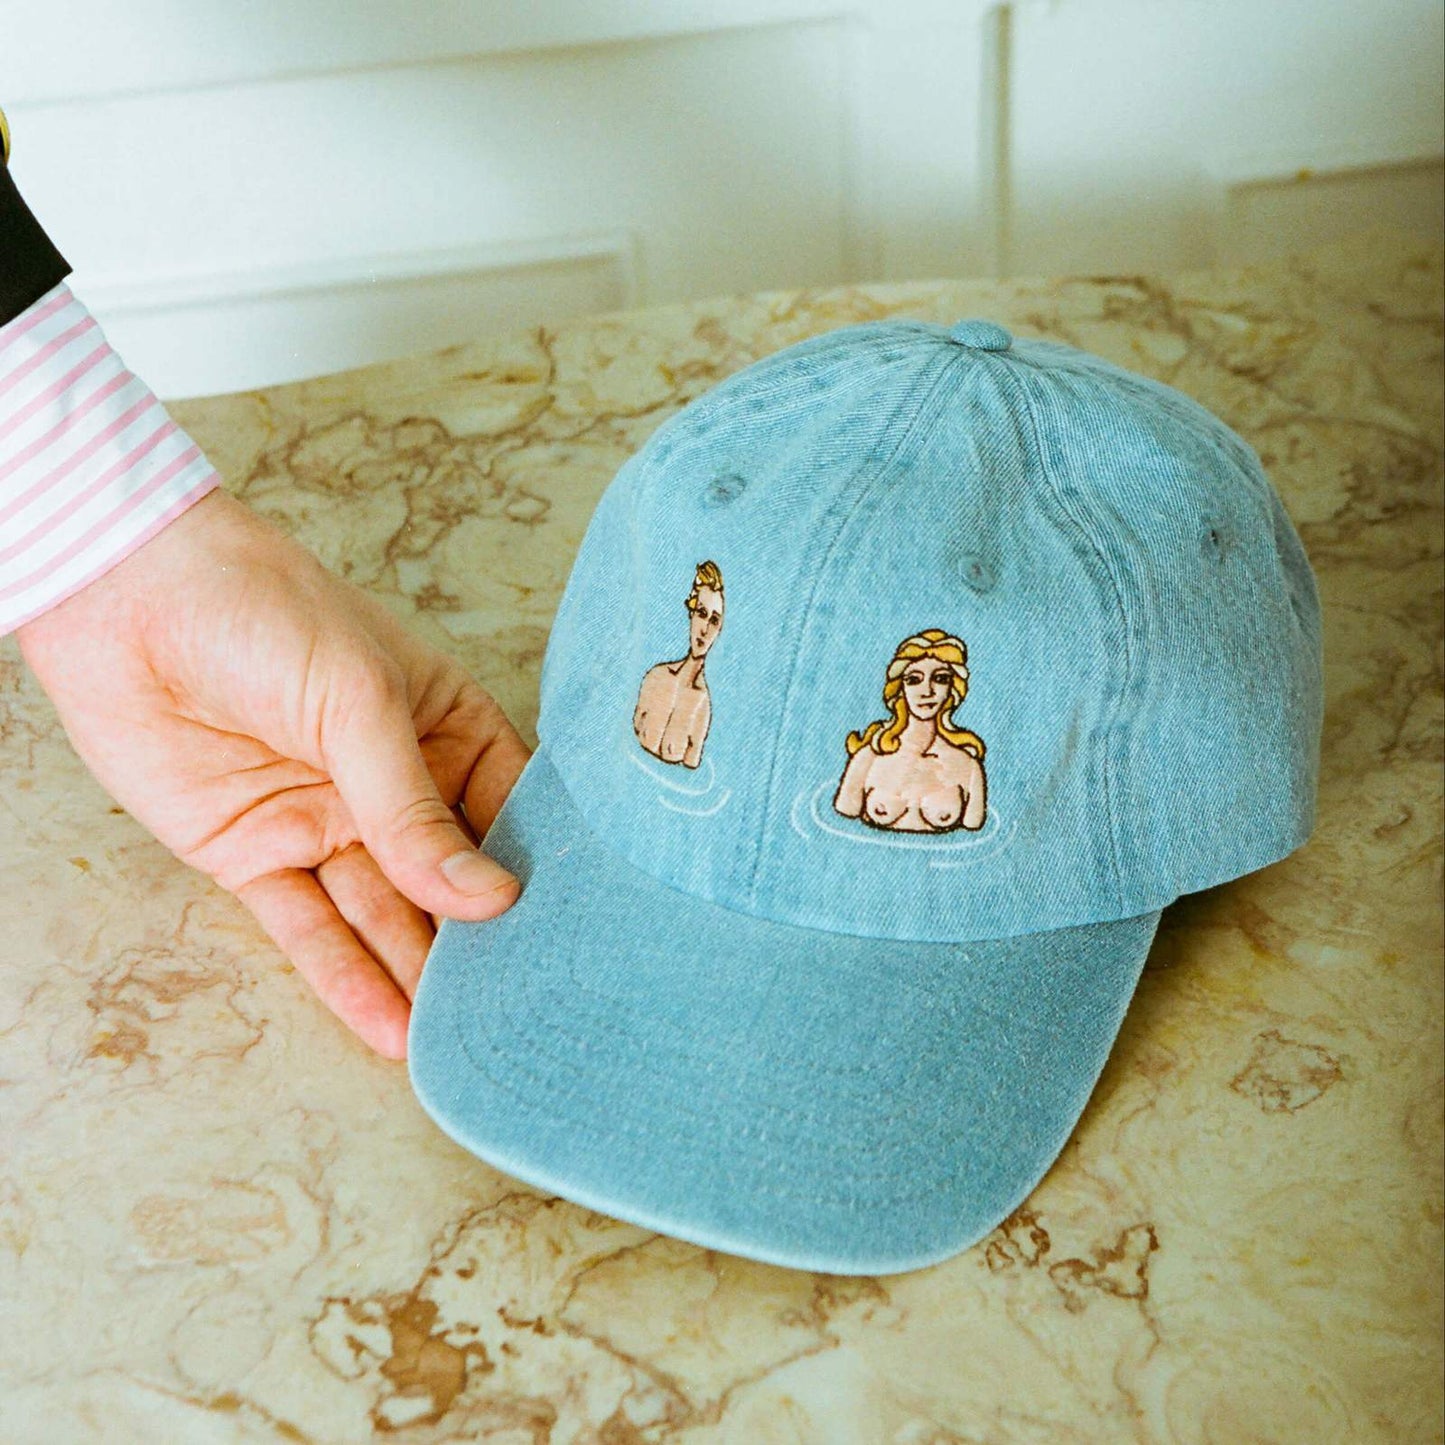 Light blue hat embroidered with Adam & Eve motif.